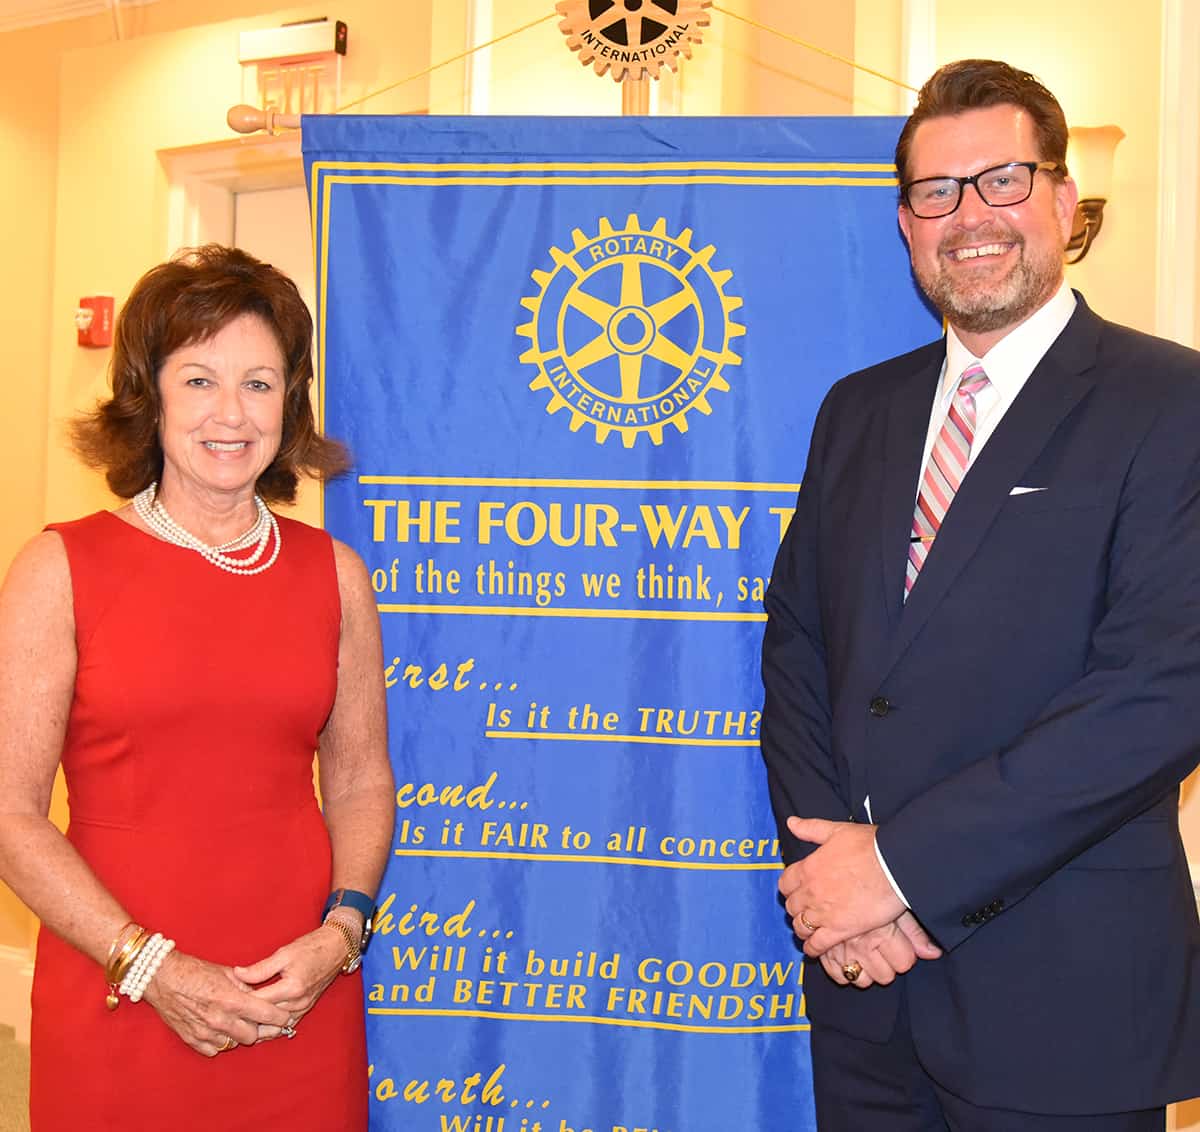 Americus Rotary Club President Gaynor Cheokas is shown above thanking South Georgia Technical College President Dr. John Watford for speaking at the Americus Rotary Club recently.